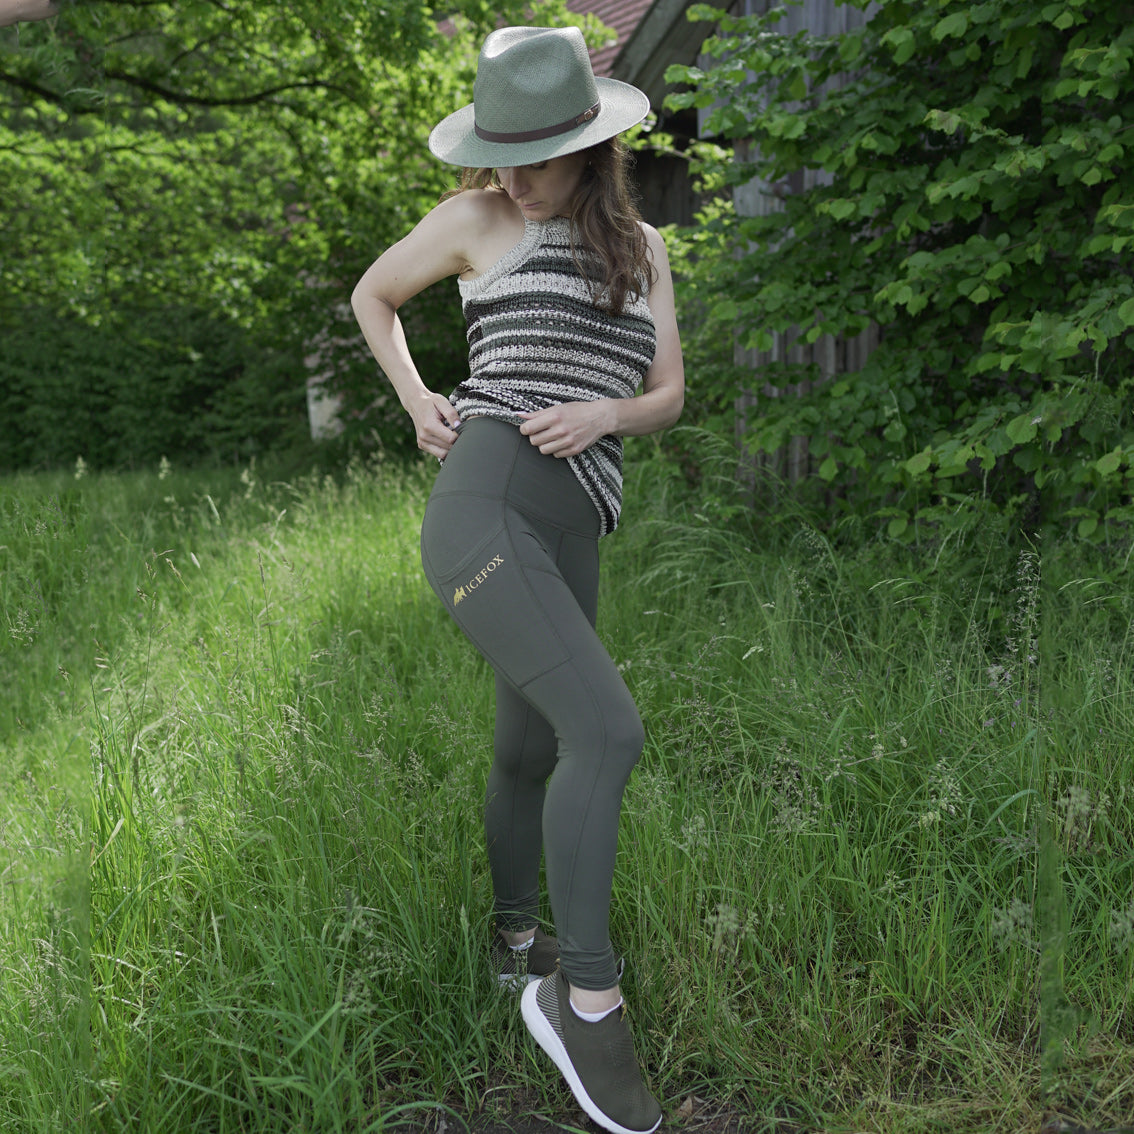 Non-Toxic Yoga Pants That Don't Make Me Itch - Ecocult | Bamboo leggings,  Ethical fashion, Bamboo clothing